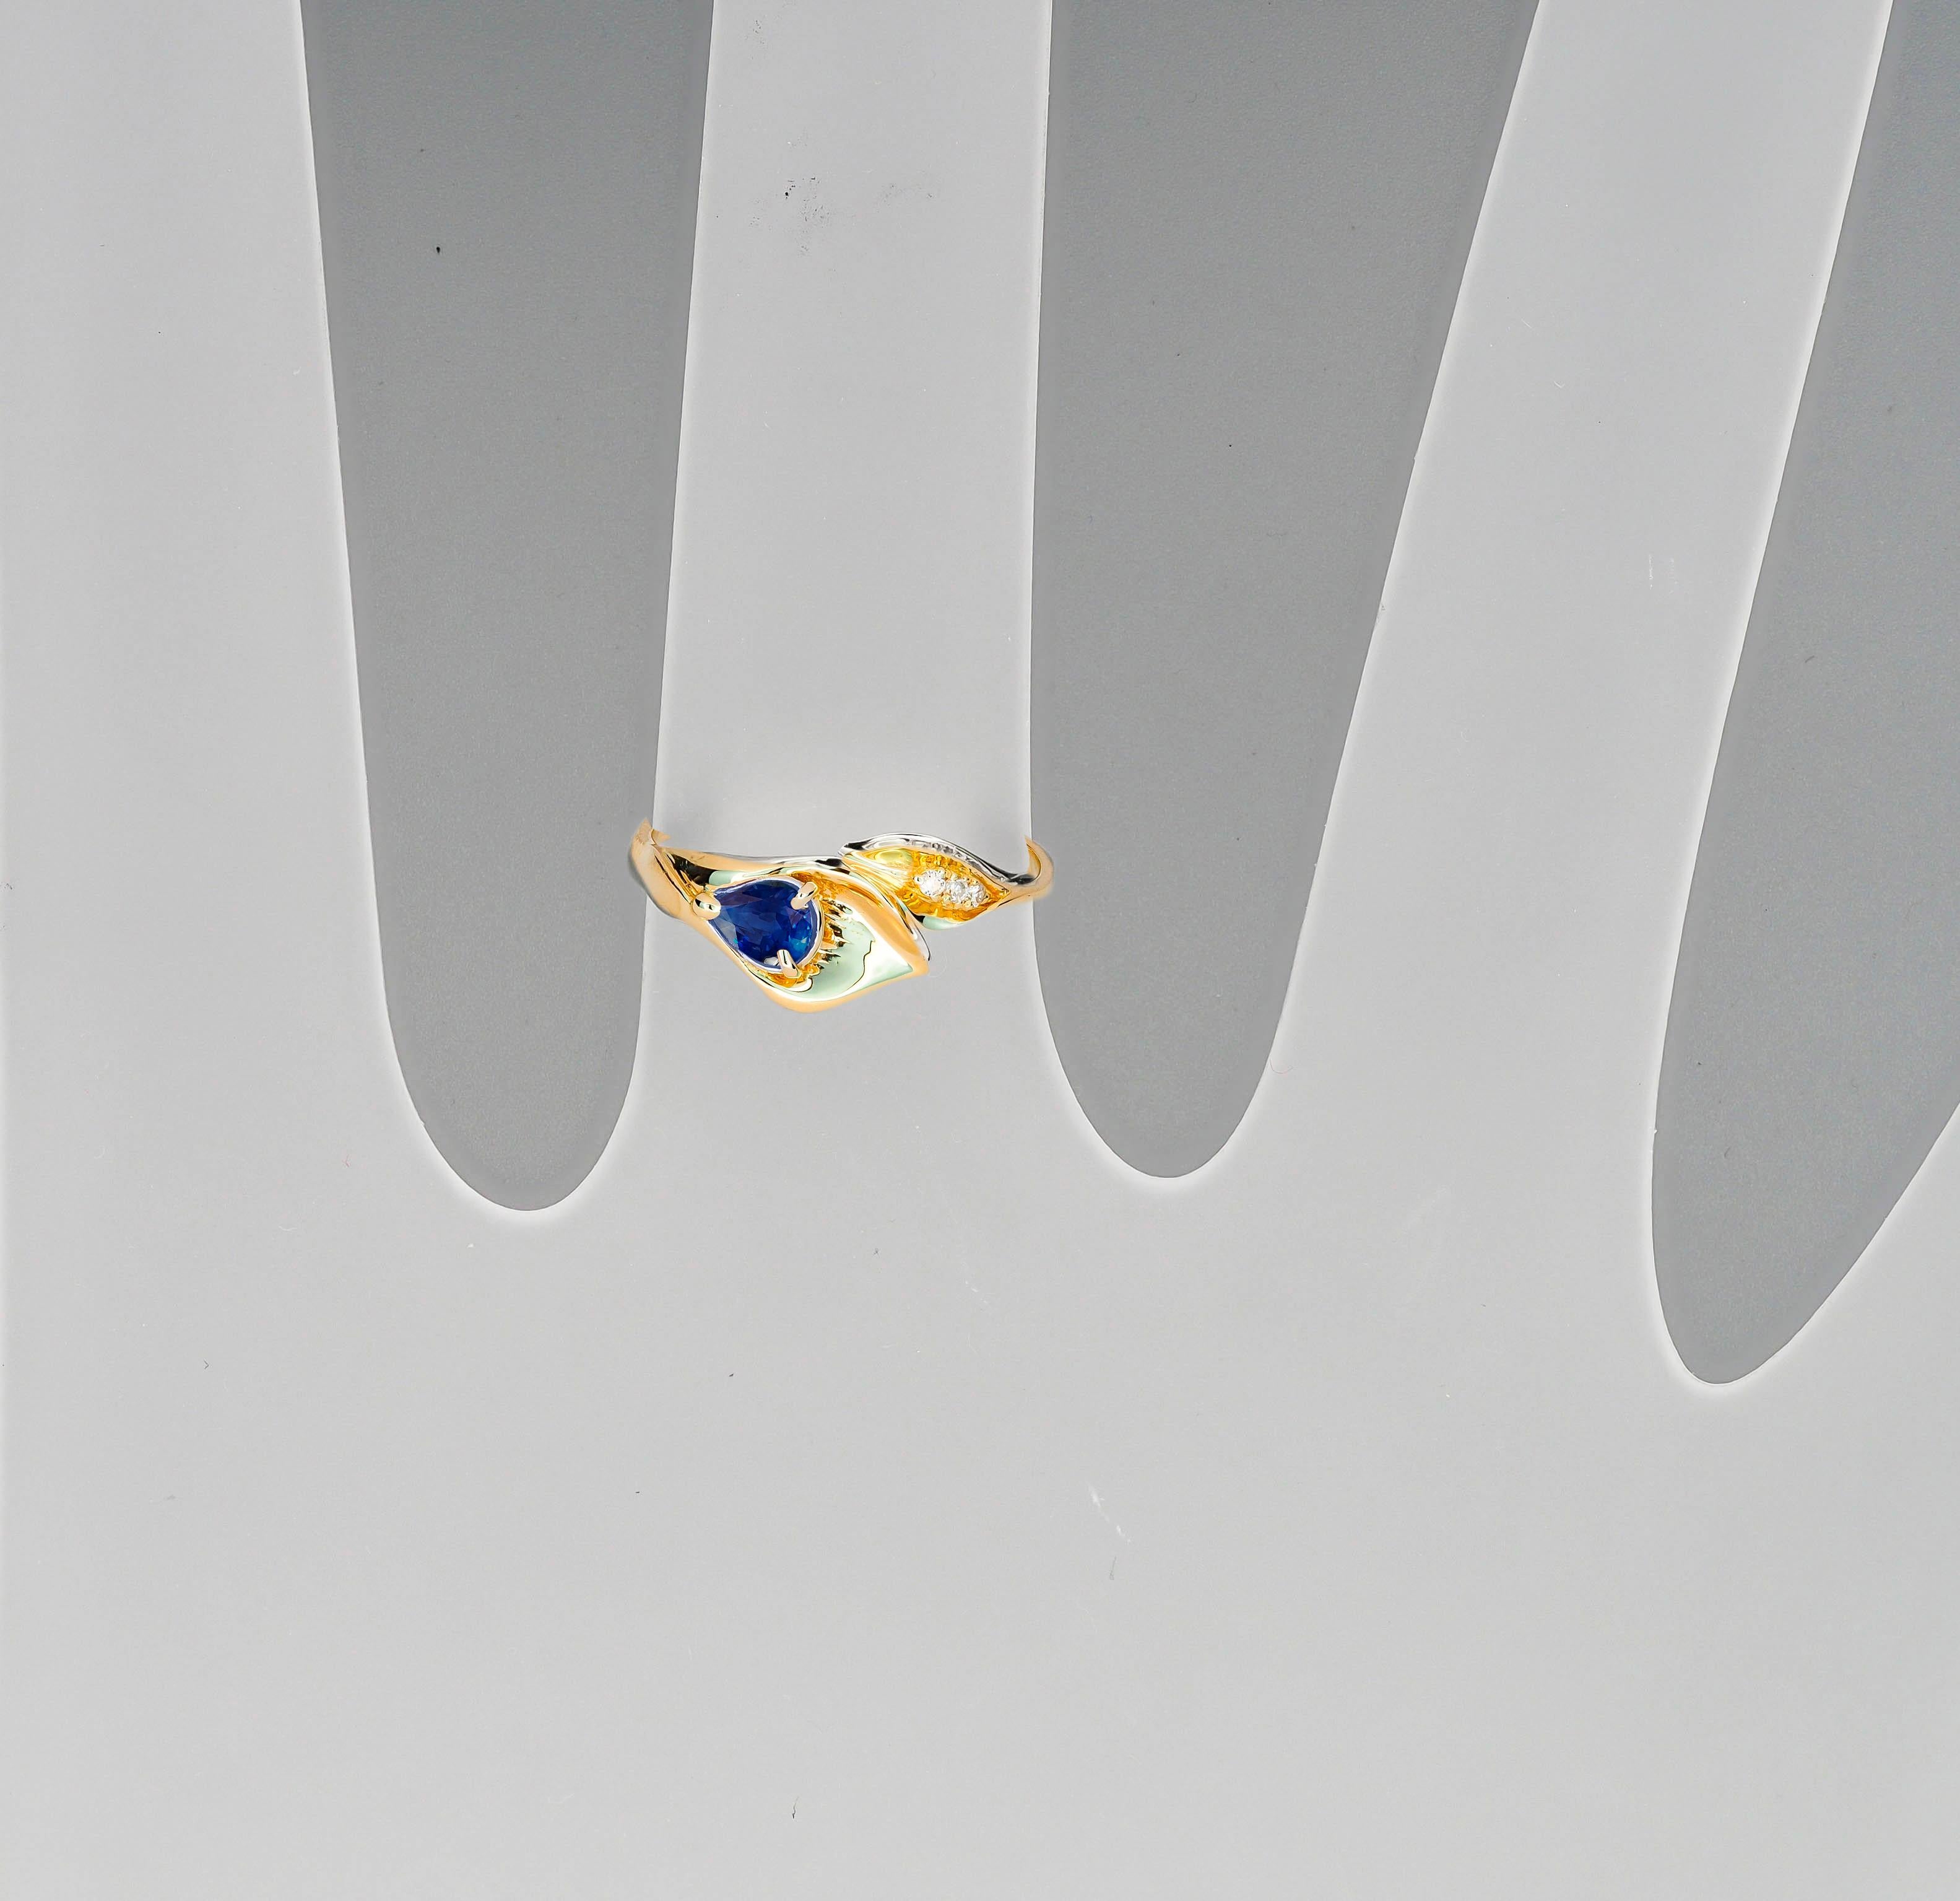 Women's Lily Calla Gold Ring, 14 Karat Gold Ring with Sapphire and Diamonds